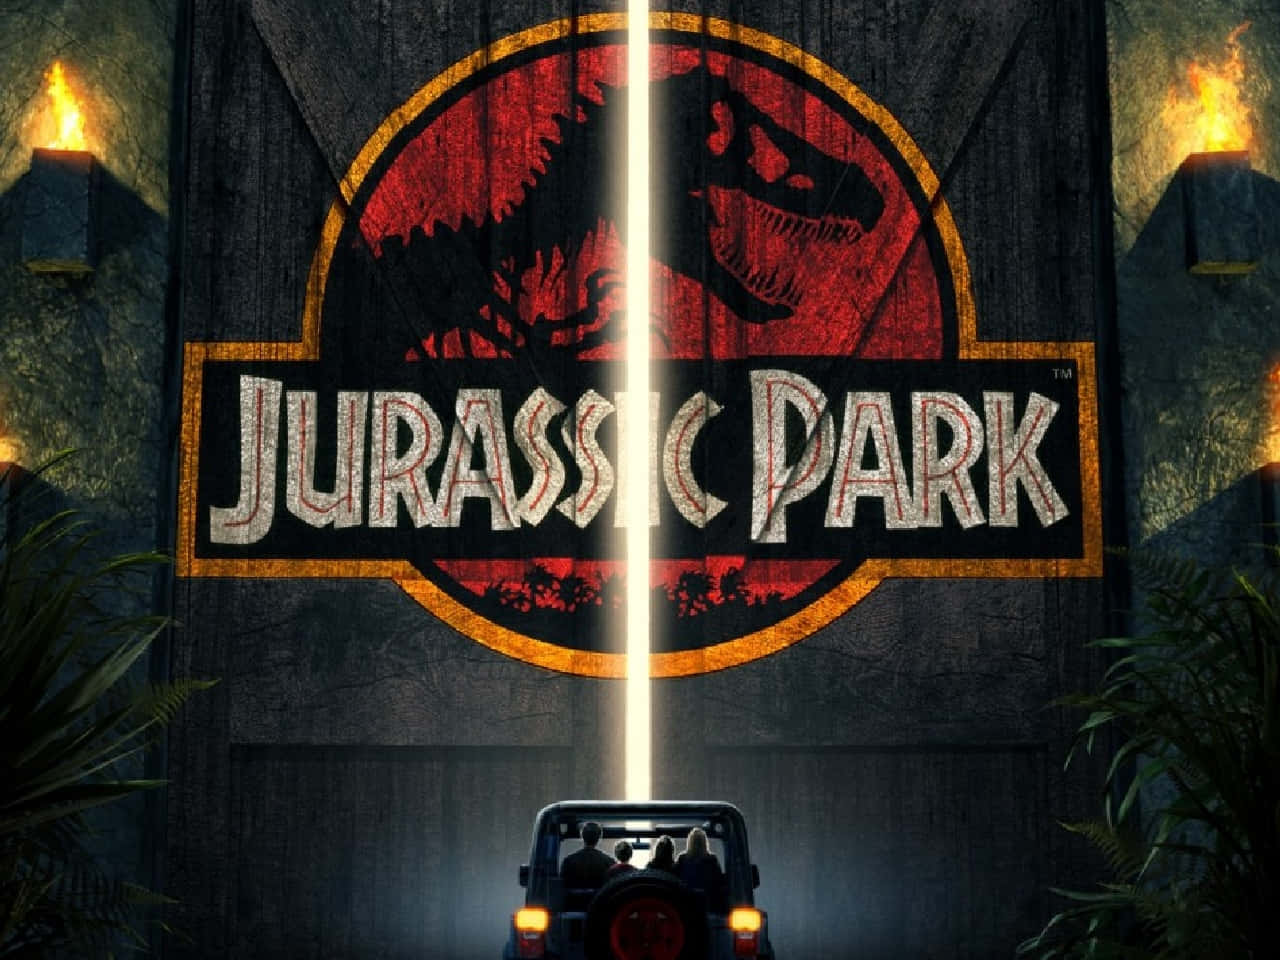 Jurassic Park Poster With A Car In Front Of It